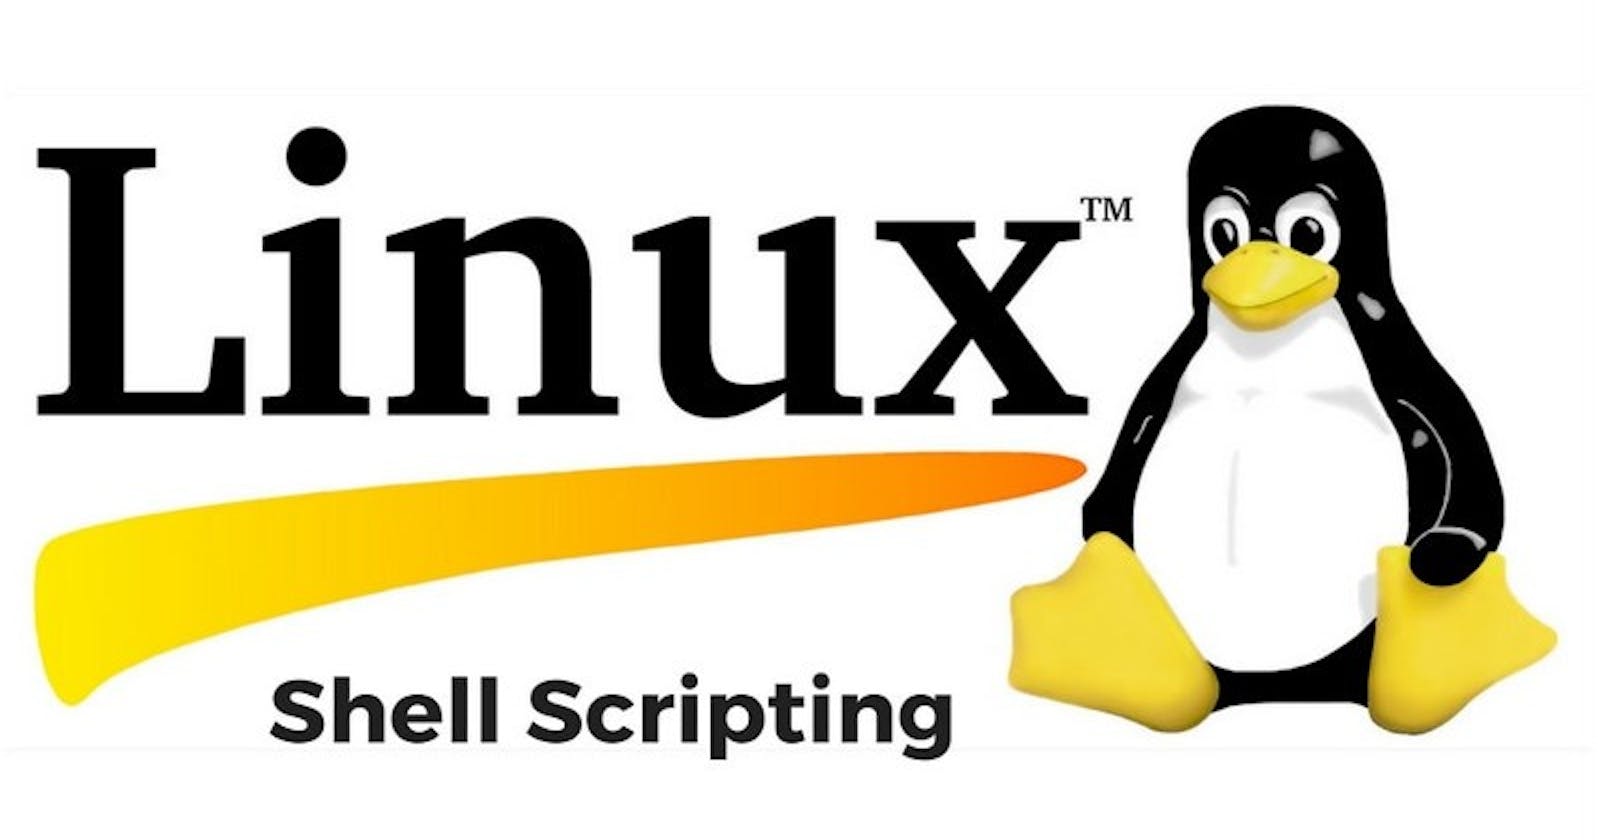 Day 5 : Advanced Linux Shell Scripting for DevOps Engineers with User management